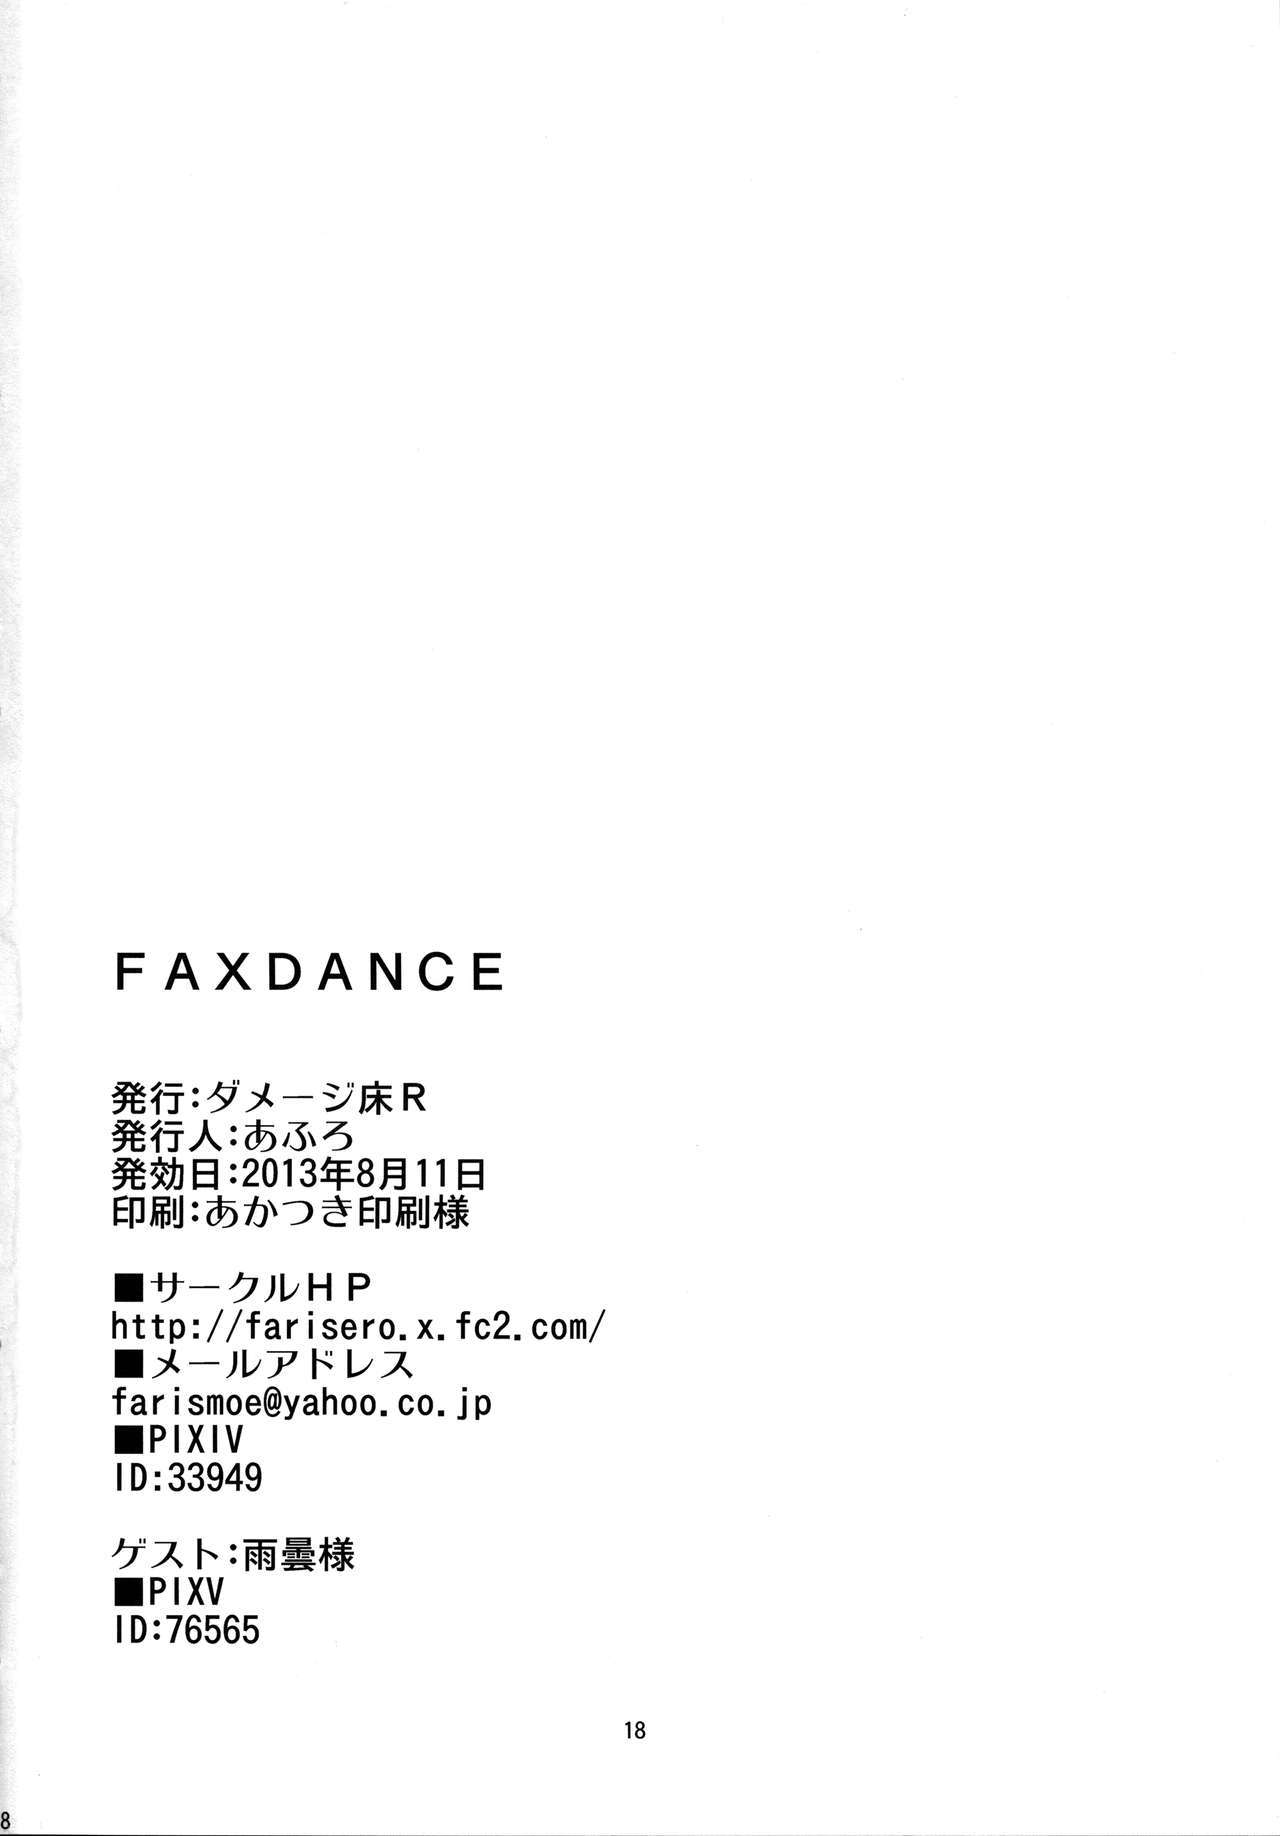 FAXDANCE